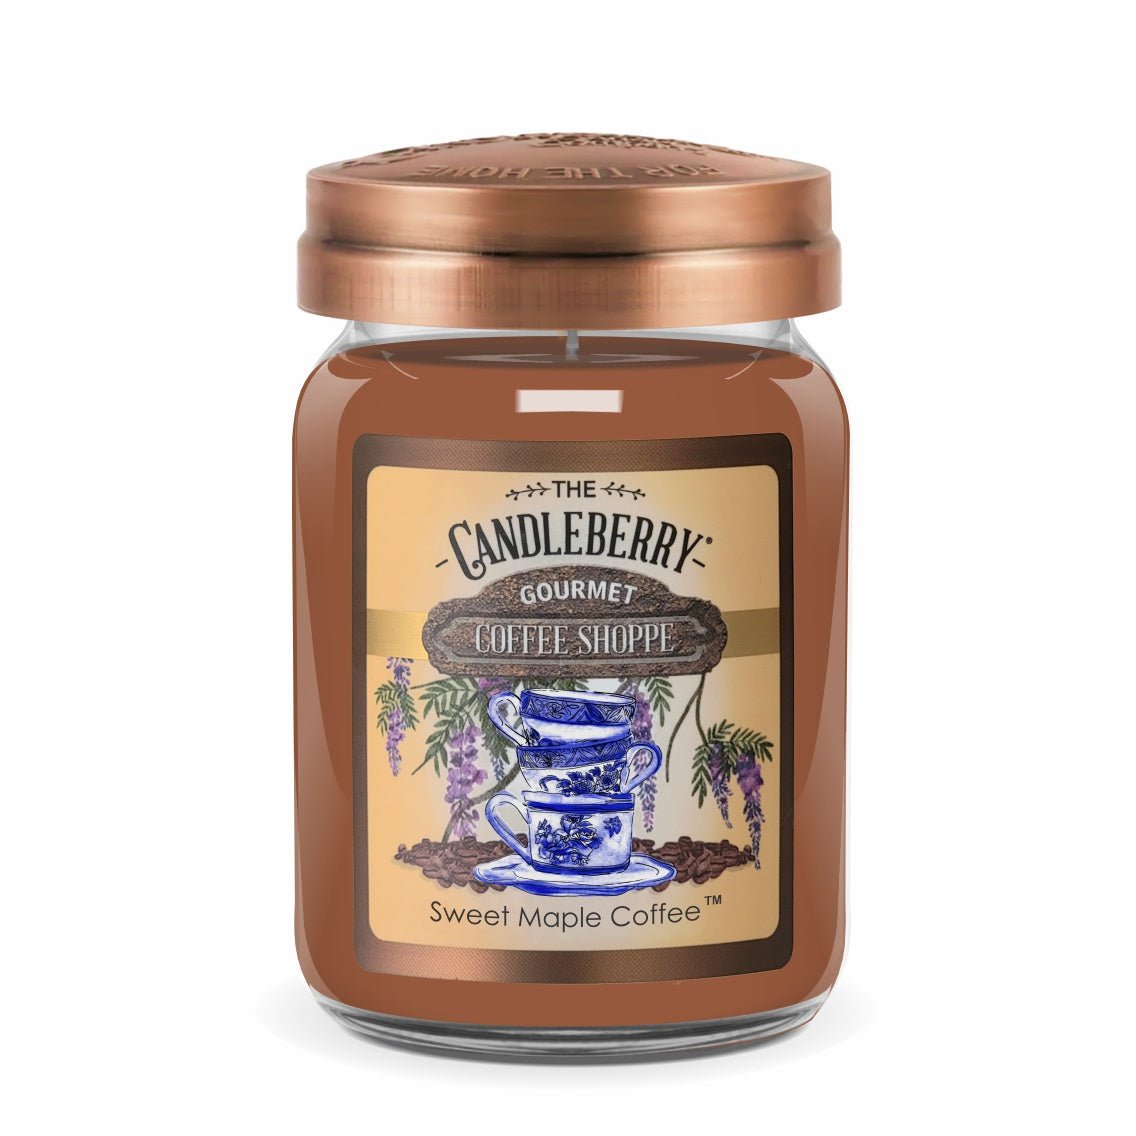 Coffee Shoppe - Sweet Maple Coffee™, Large Jar Candle - Spring - The Candleberry® Candle Company - Coffee Shoppe Large Jar Candle - The Candleberry Candle Company